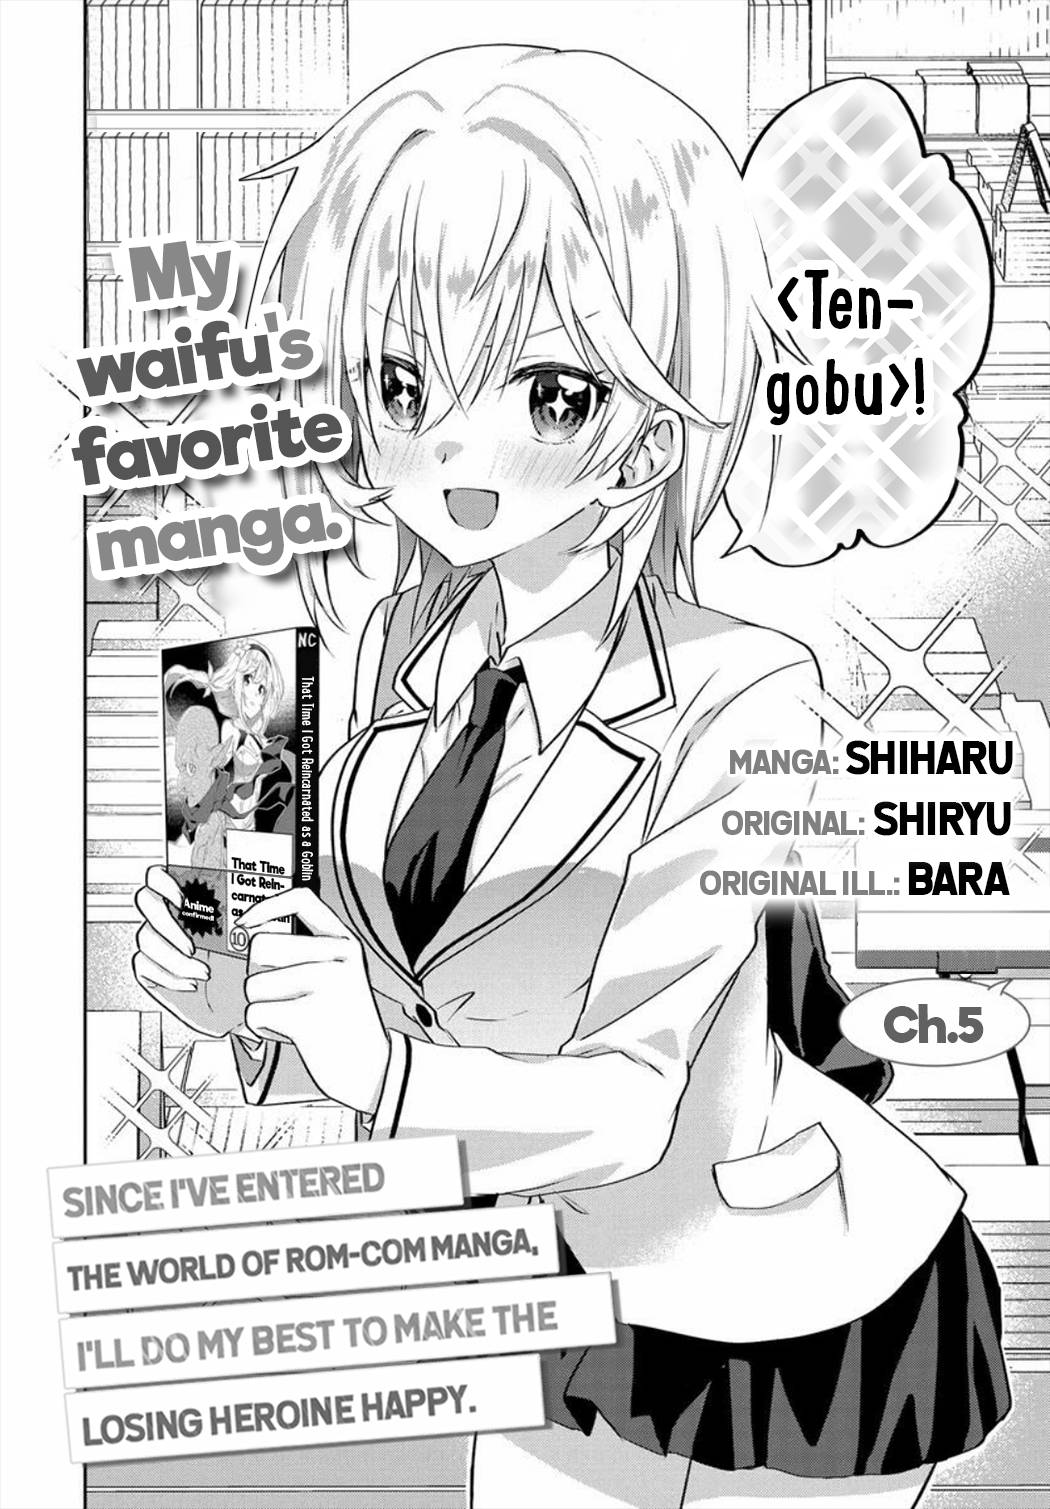 Since I’Ve Entered The World Of Romantic Comedy Manga, I’Ll Do My Best To Make The Losing Heroine Happy - chapter 5.1 - #2